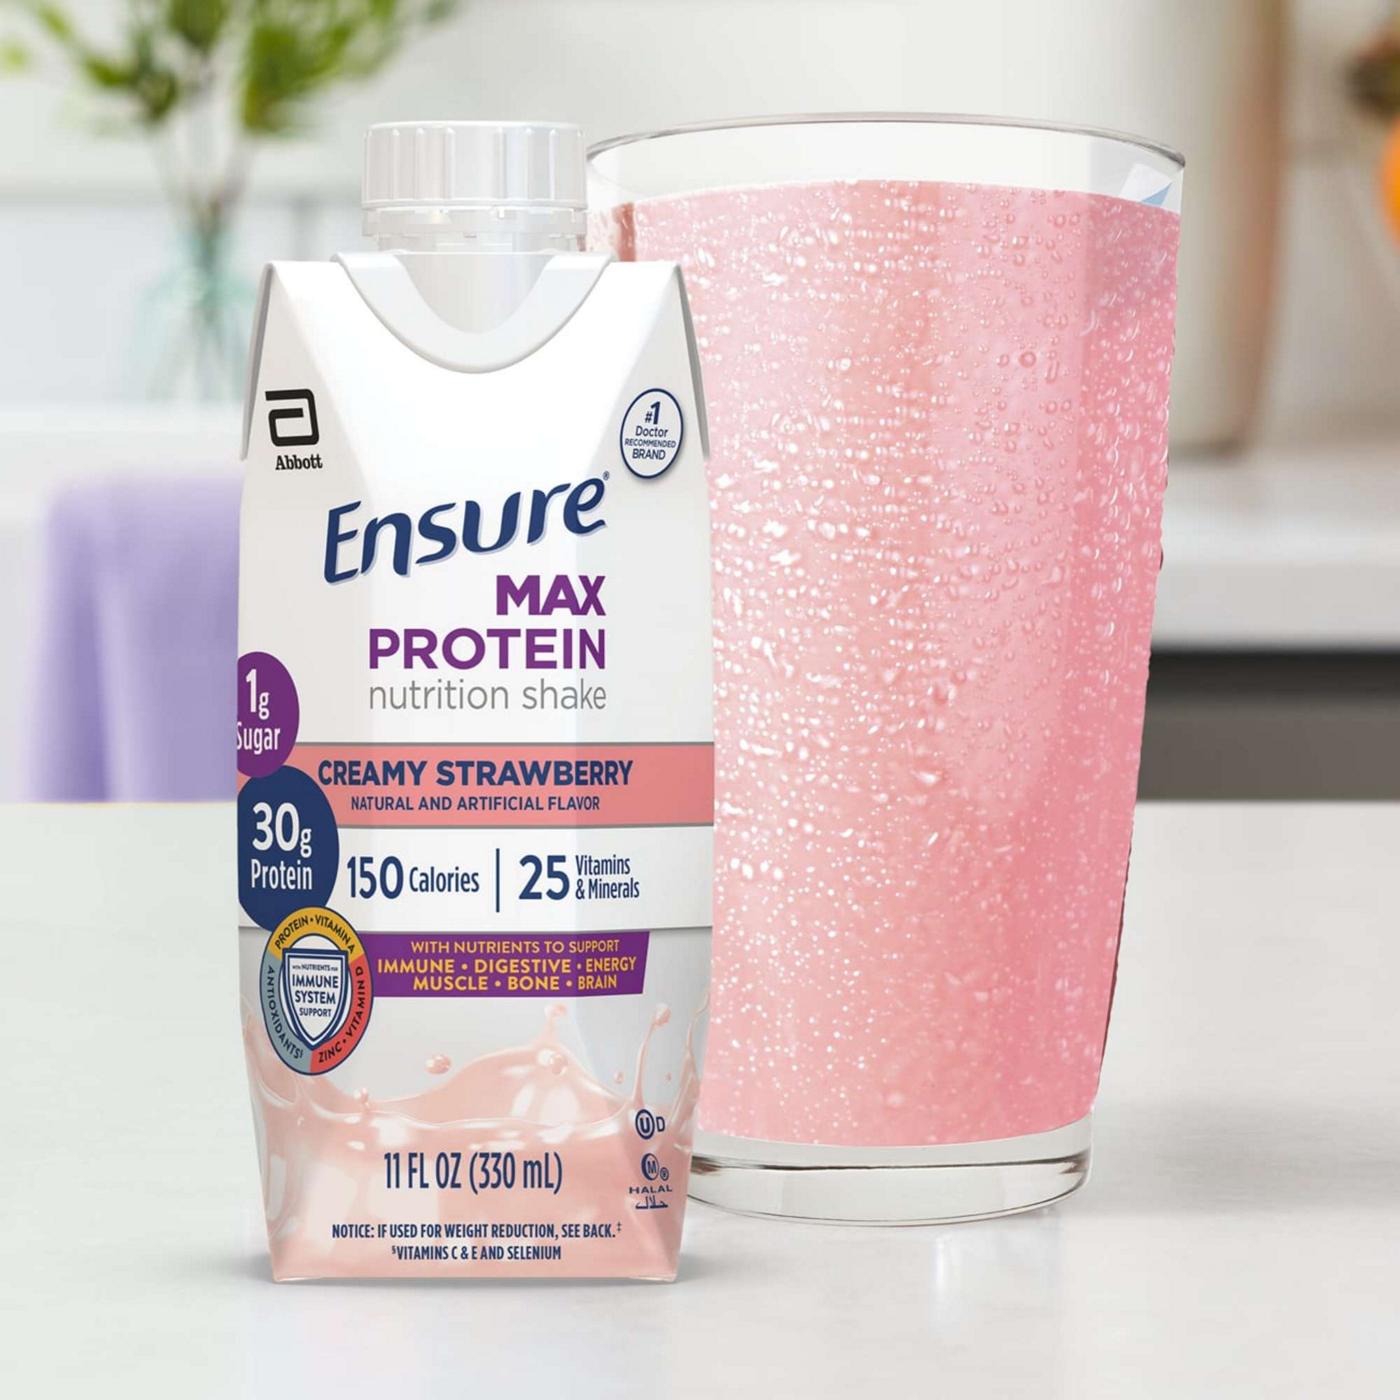 Ensure Max Protein Nutrition Shake - Creamy Strawberry, 4 pk; image 10 of 14